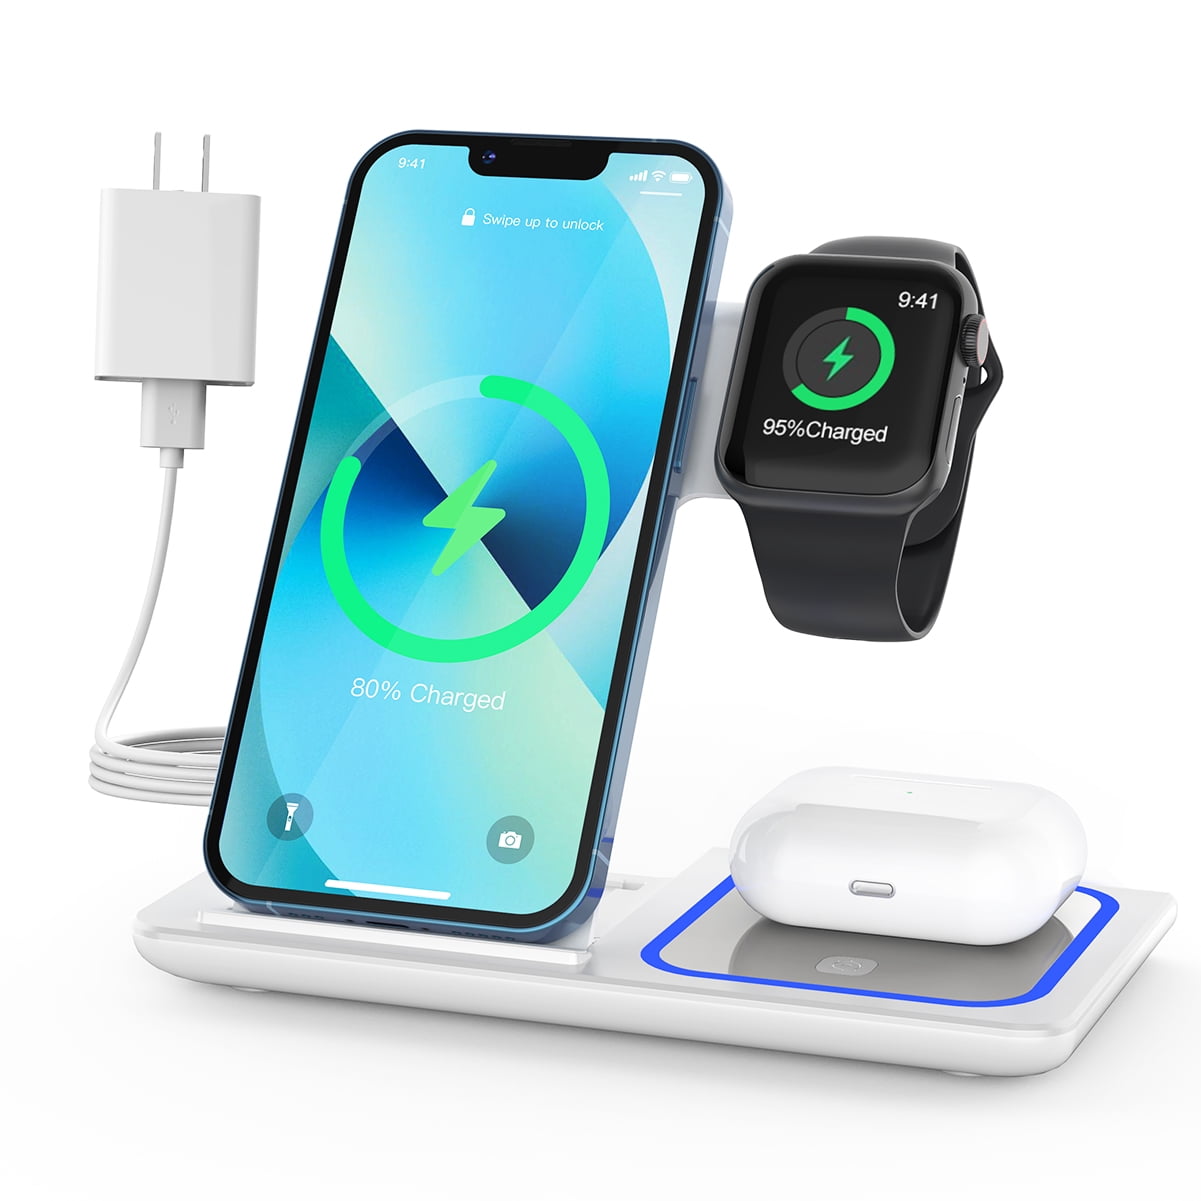 Charging Station for Multiple Devices Apple,3 in Apple Charging Station,Wireless Charging Station for iPhone 13 12 11 Pro Pro Max XS XS Max XR XS X,